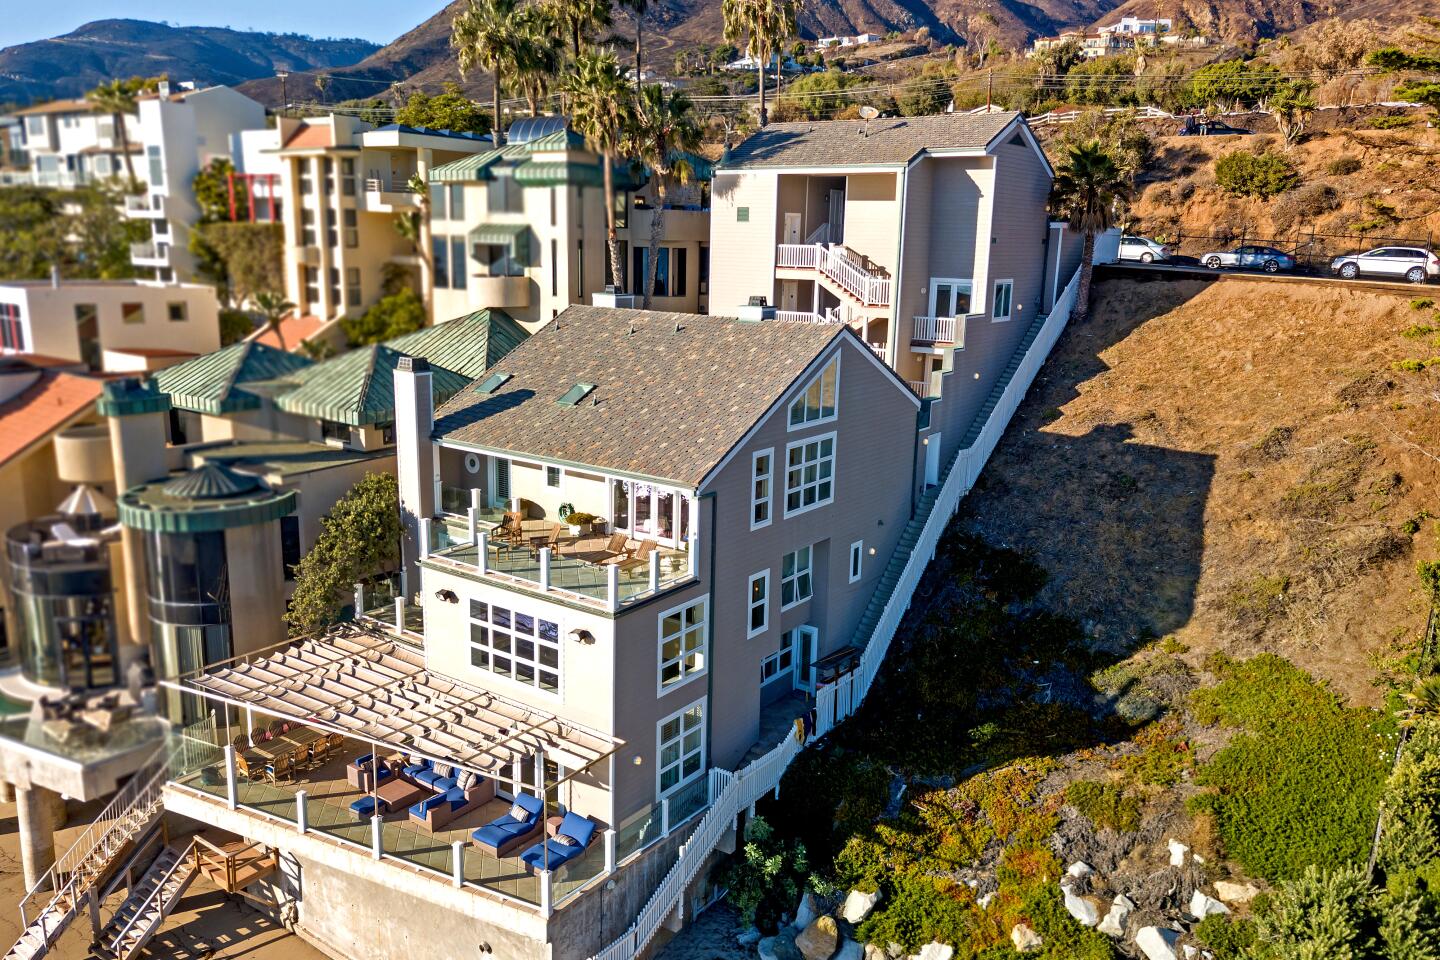 An Oceanfront New Build in Malibu, California, Hits Market for $40